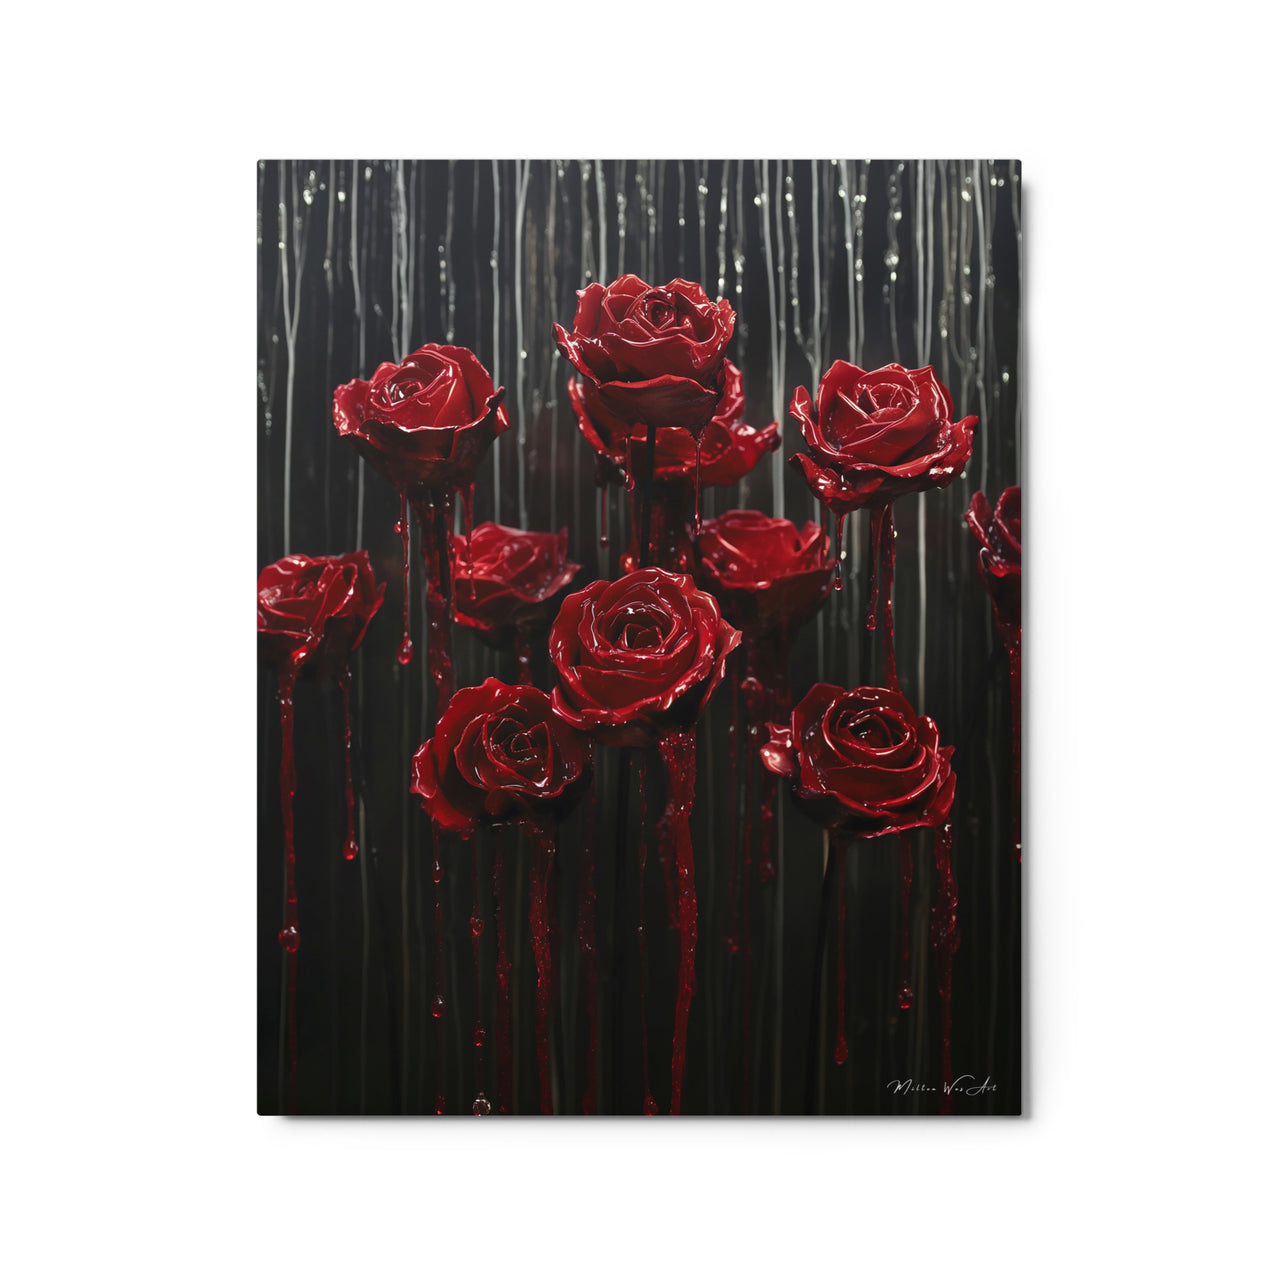 Close-up of vibrant red metallic roses with glossy drips on a dark striped background, metal print by Milton Wes Art.